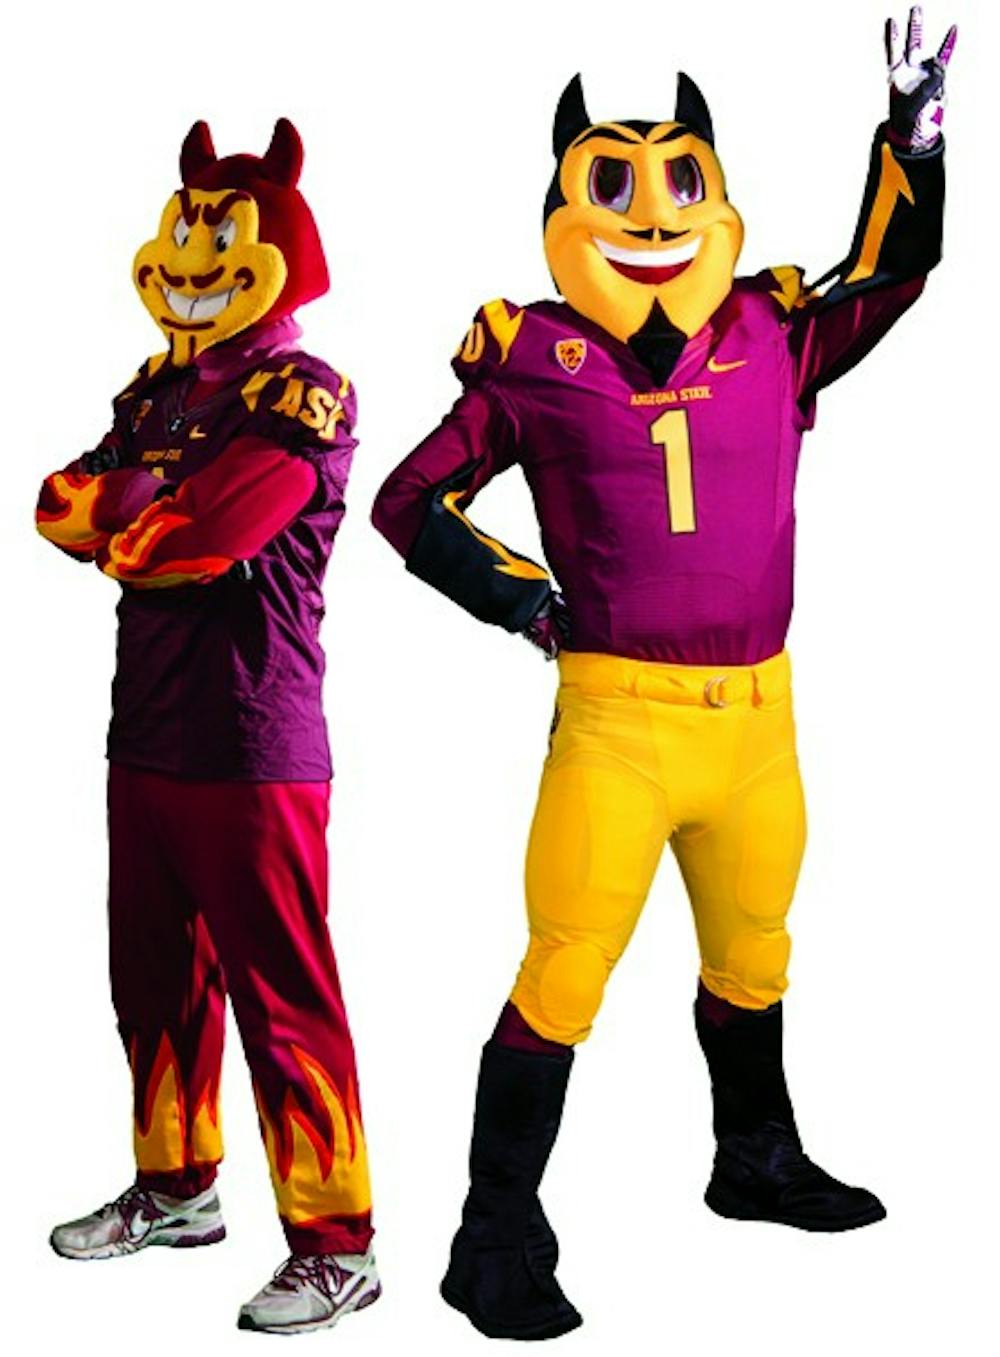 The old Sparky costume, on the left, featured sweatpants and flames. The newer design, on the right, was designed in collaboration with Disney. Alumni and student reactions to the new mascot have been mixed. (Photo Courtesy of ASU Media Relations)